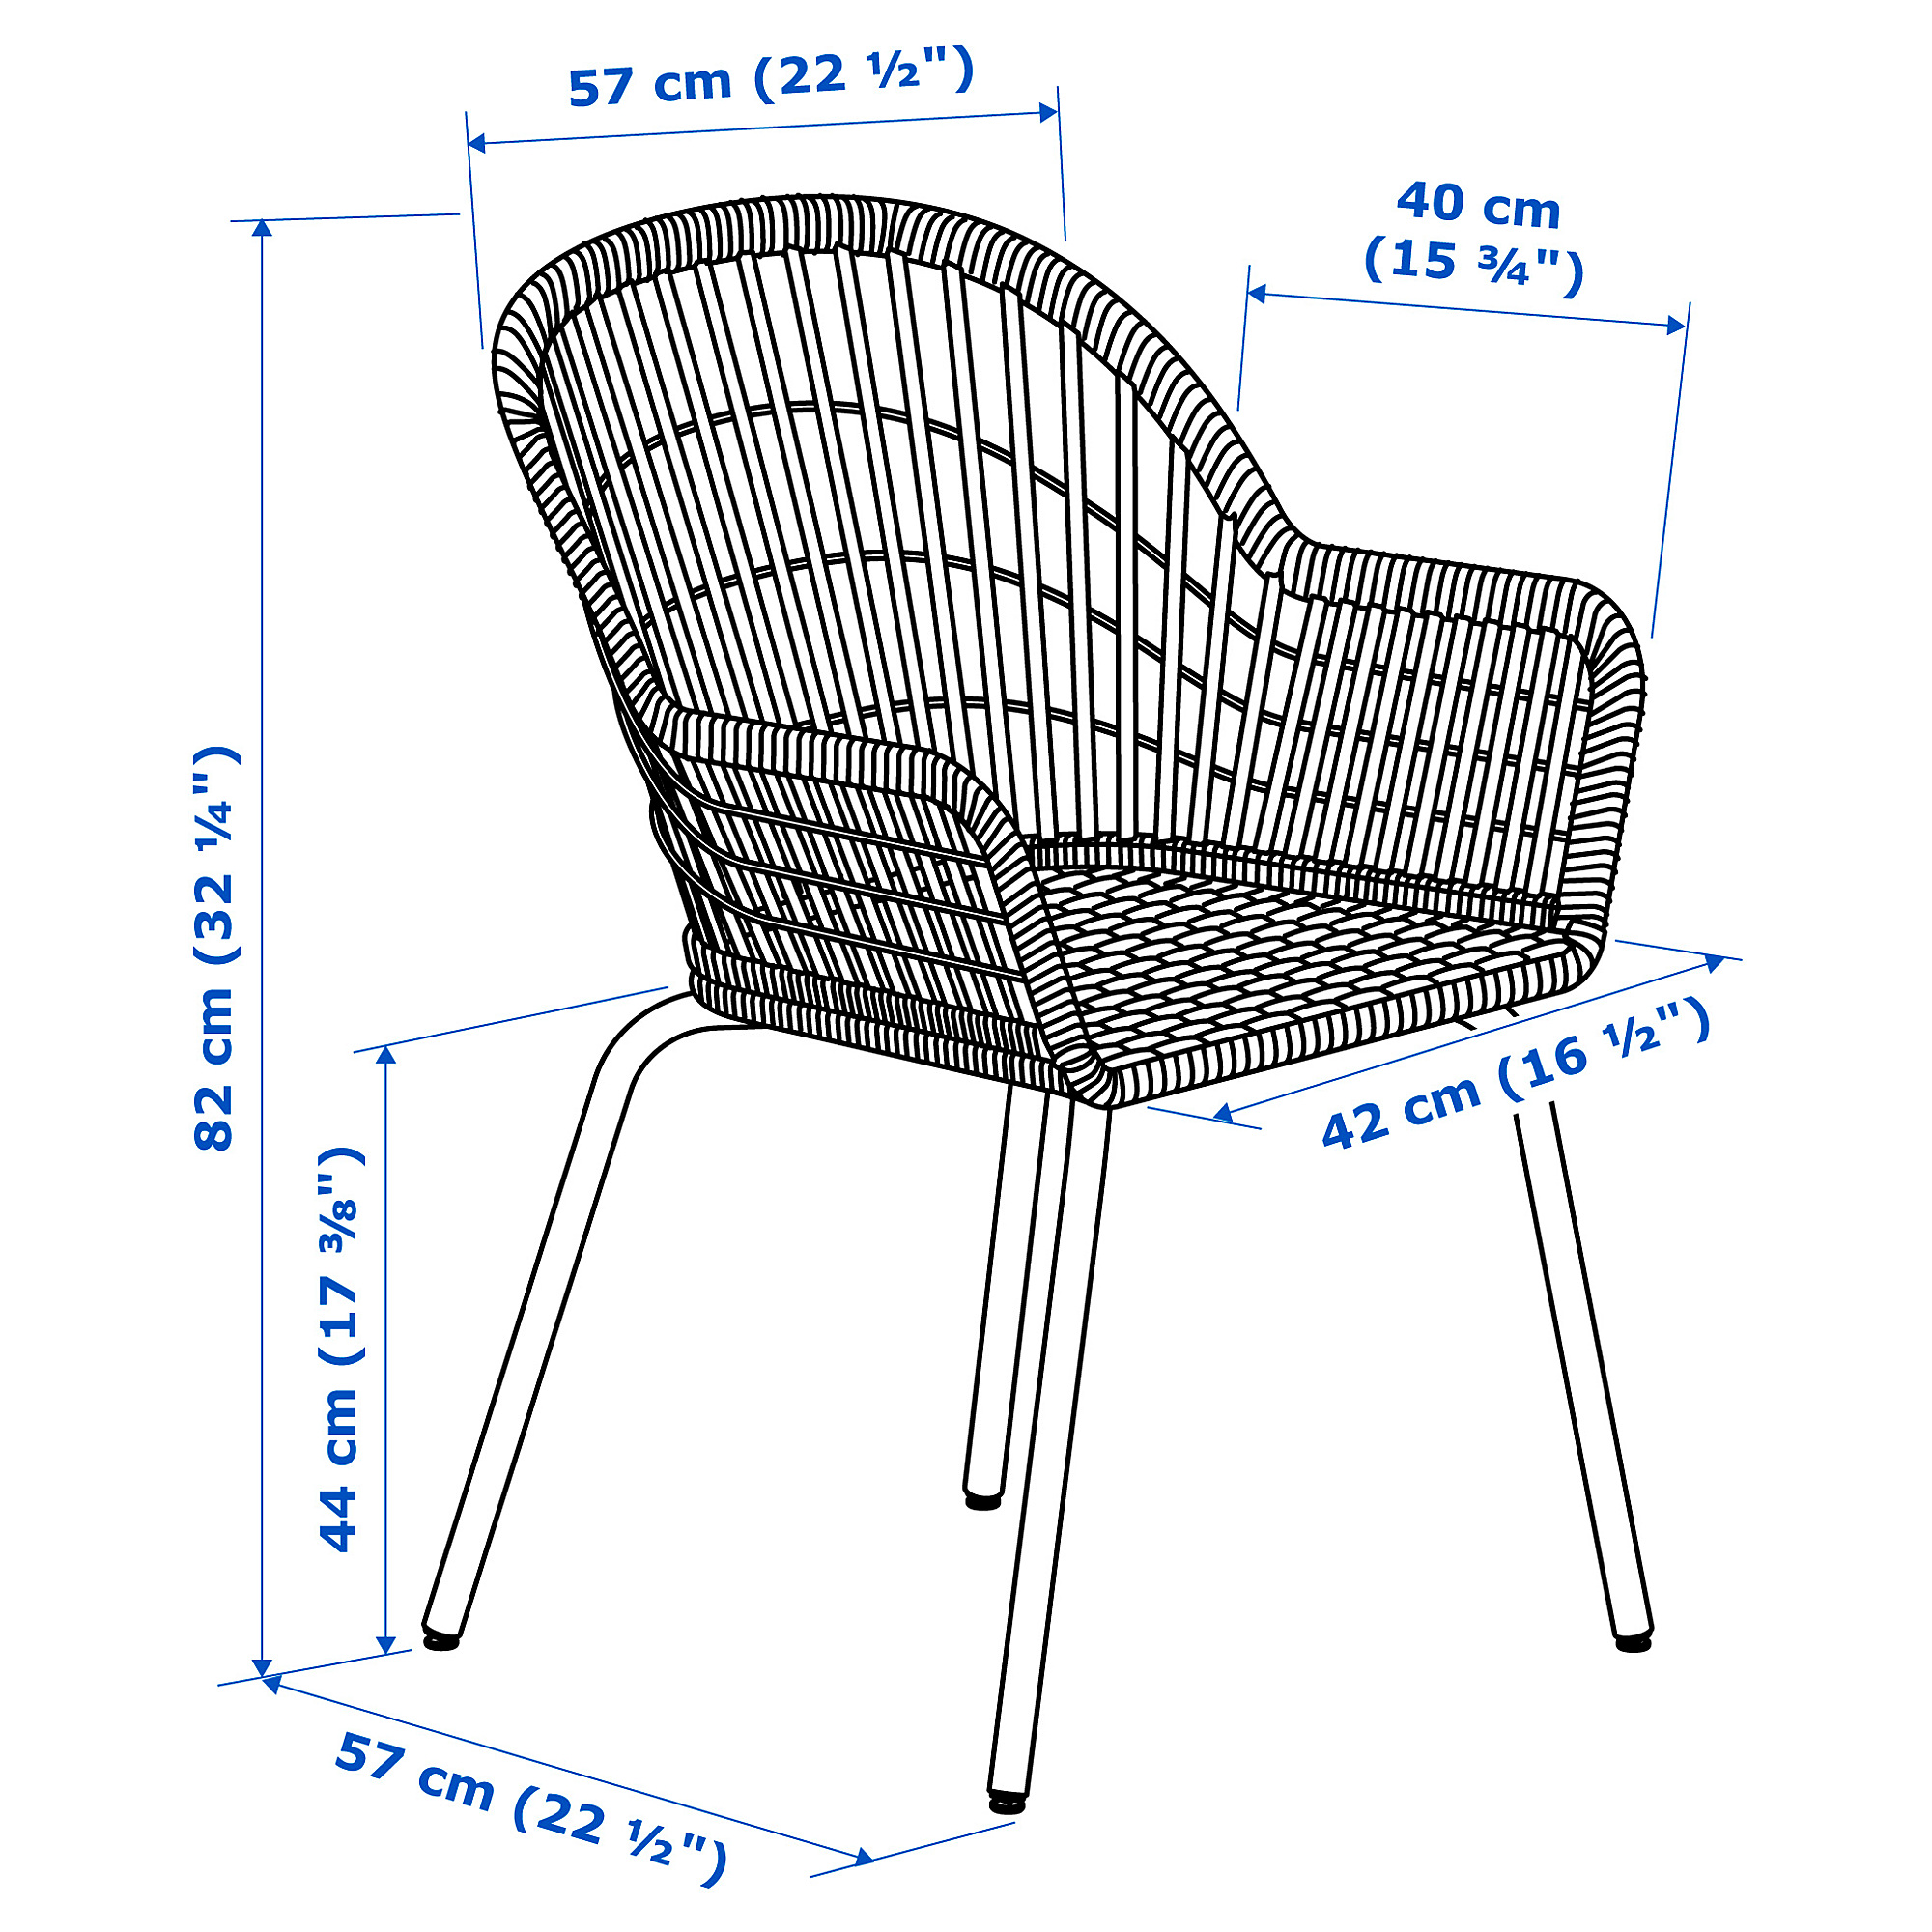 NILSOVE chair with armrests